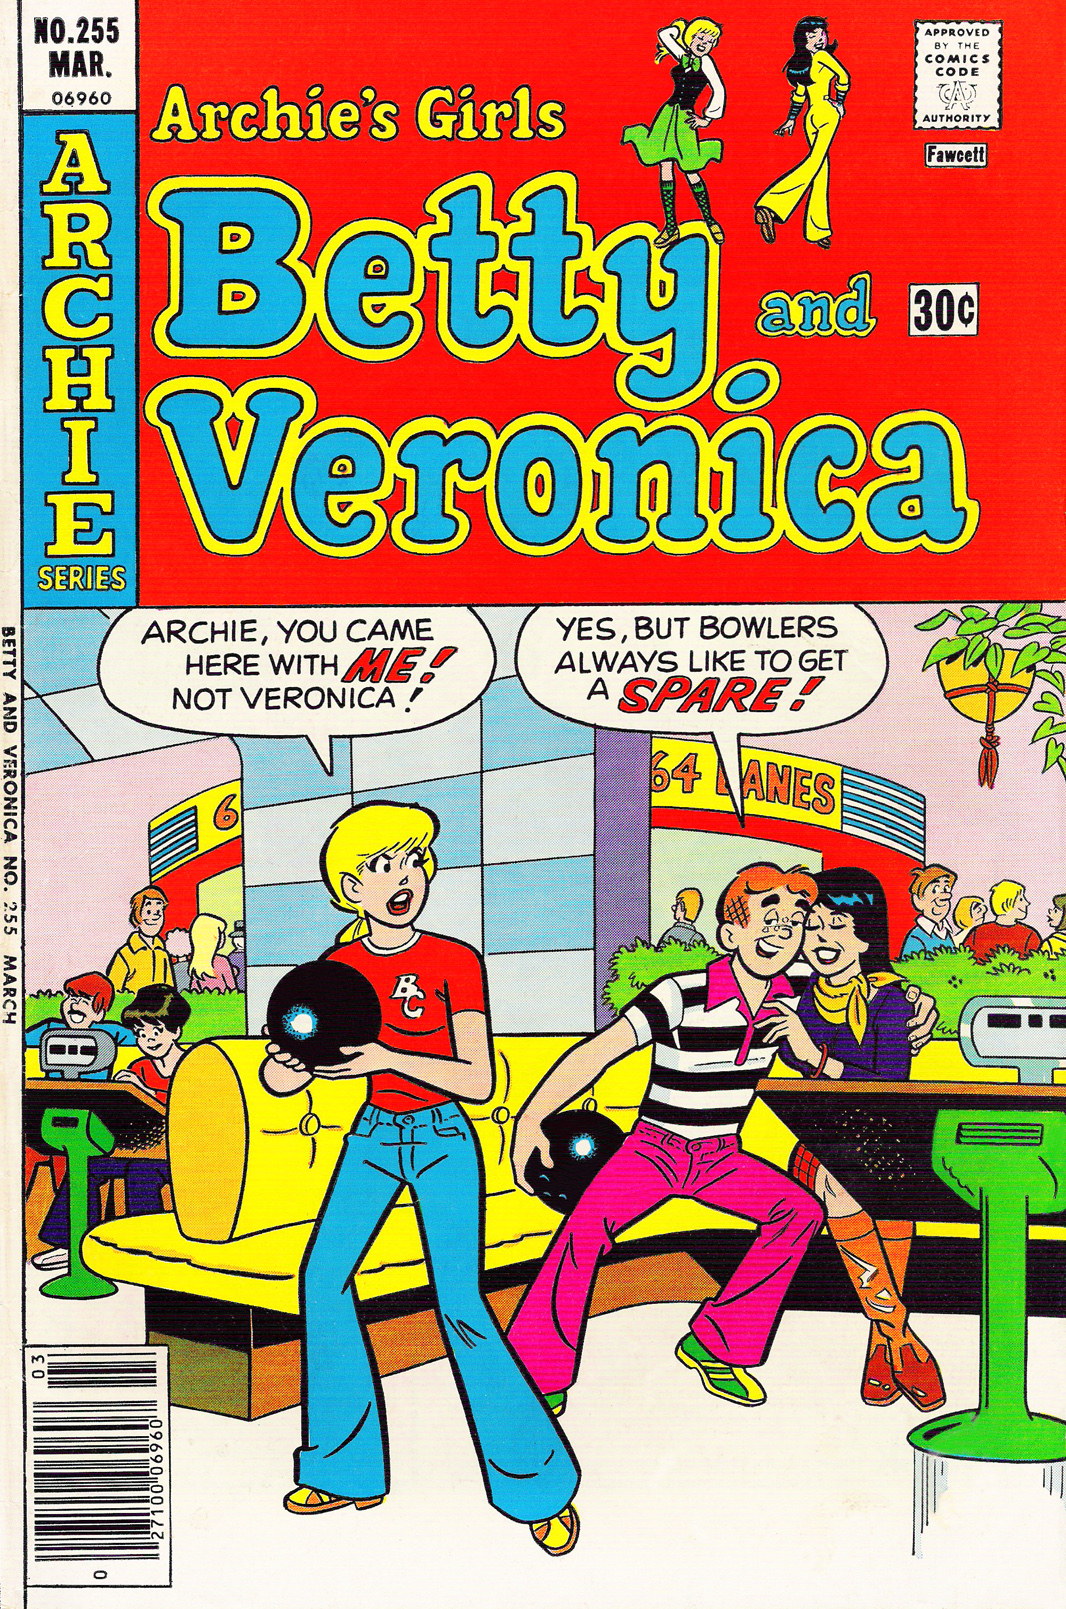 Read online Archie's Girls Betty and Veronica comic -  Issue #255 - 1